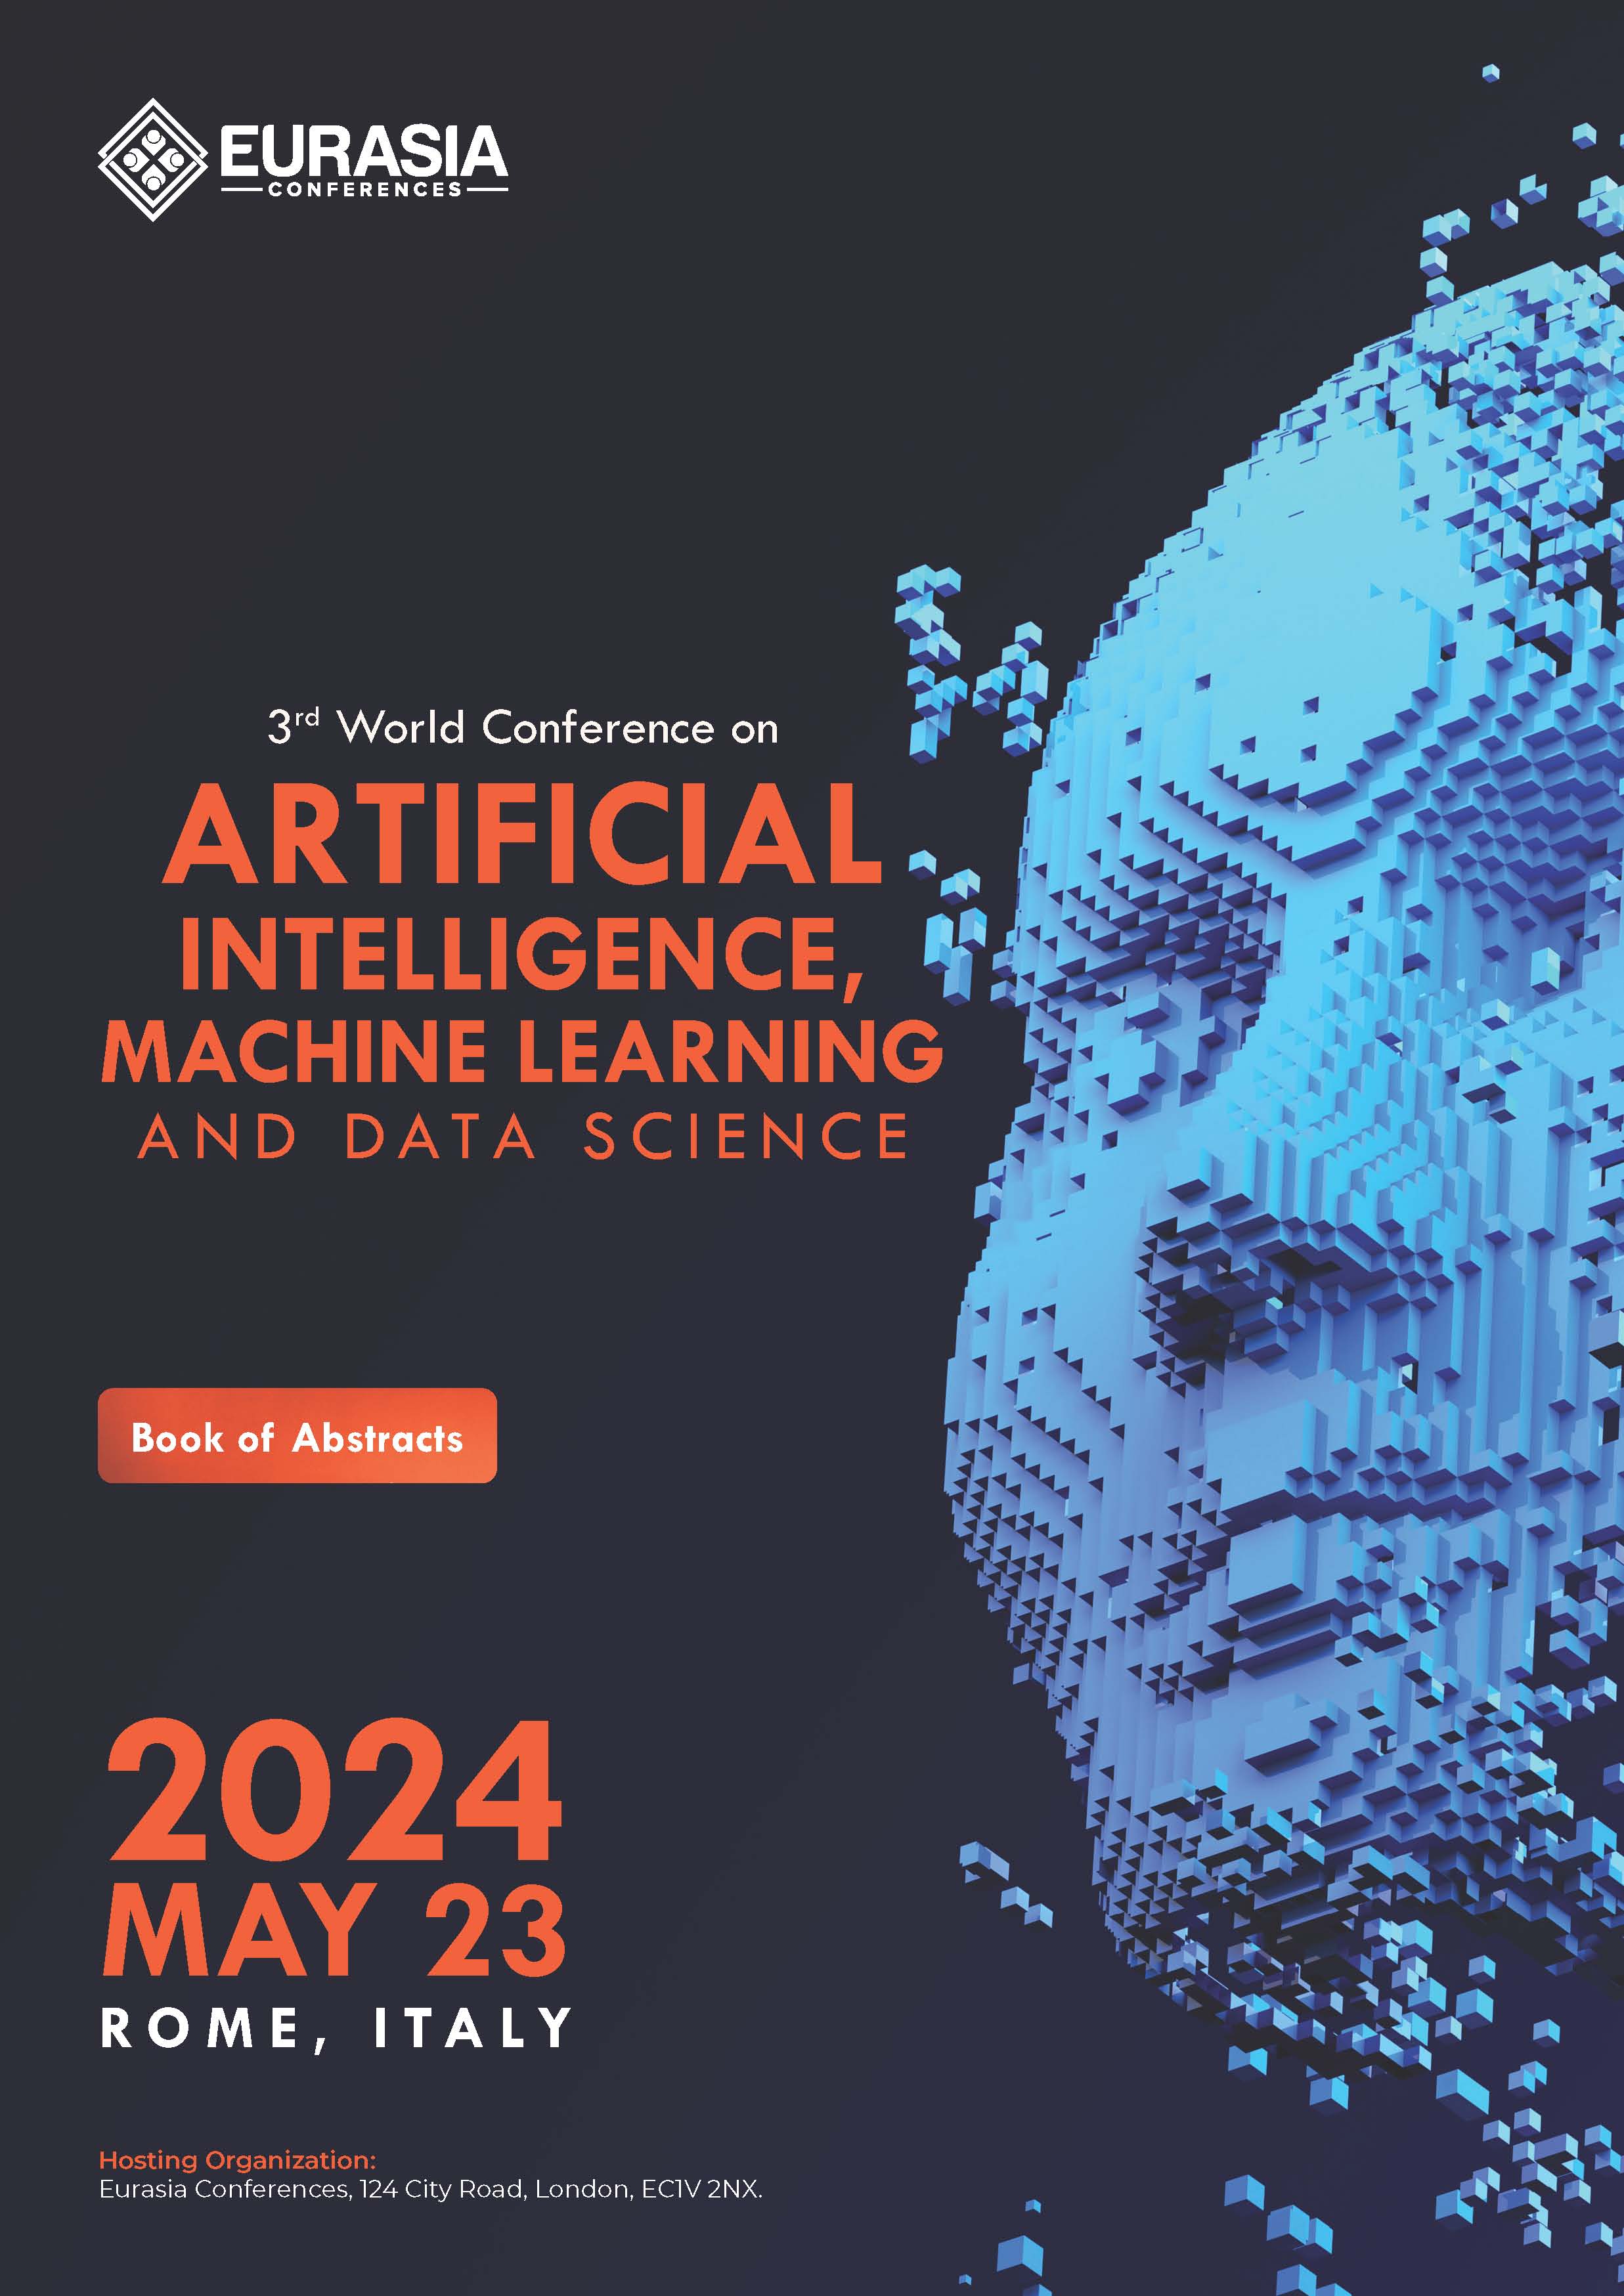 Abstracts of the 3rd World Conference on Artificial Intelligence, Machine Learning and Data Science